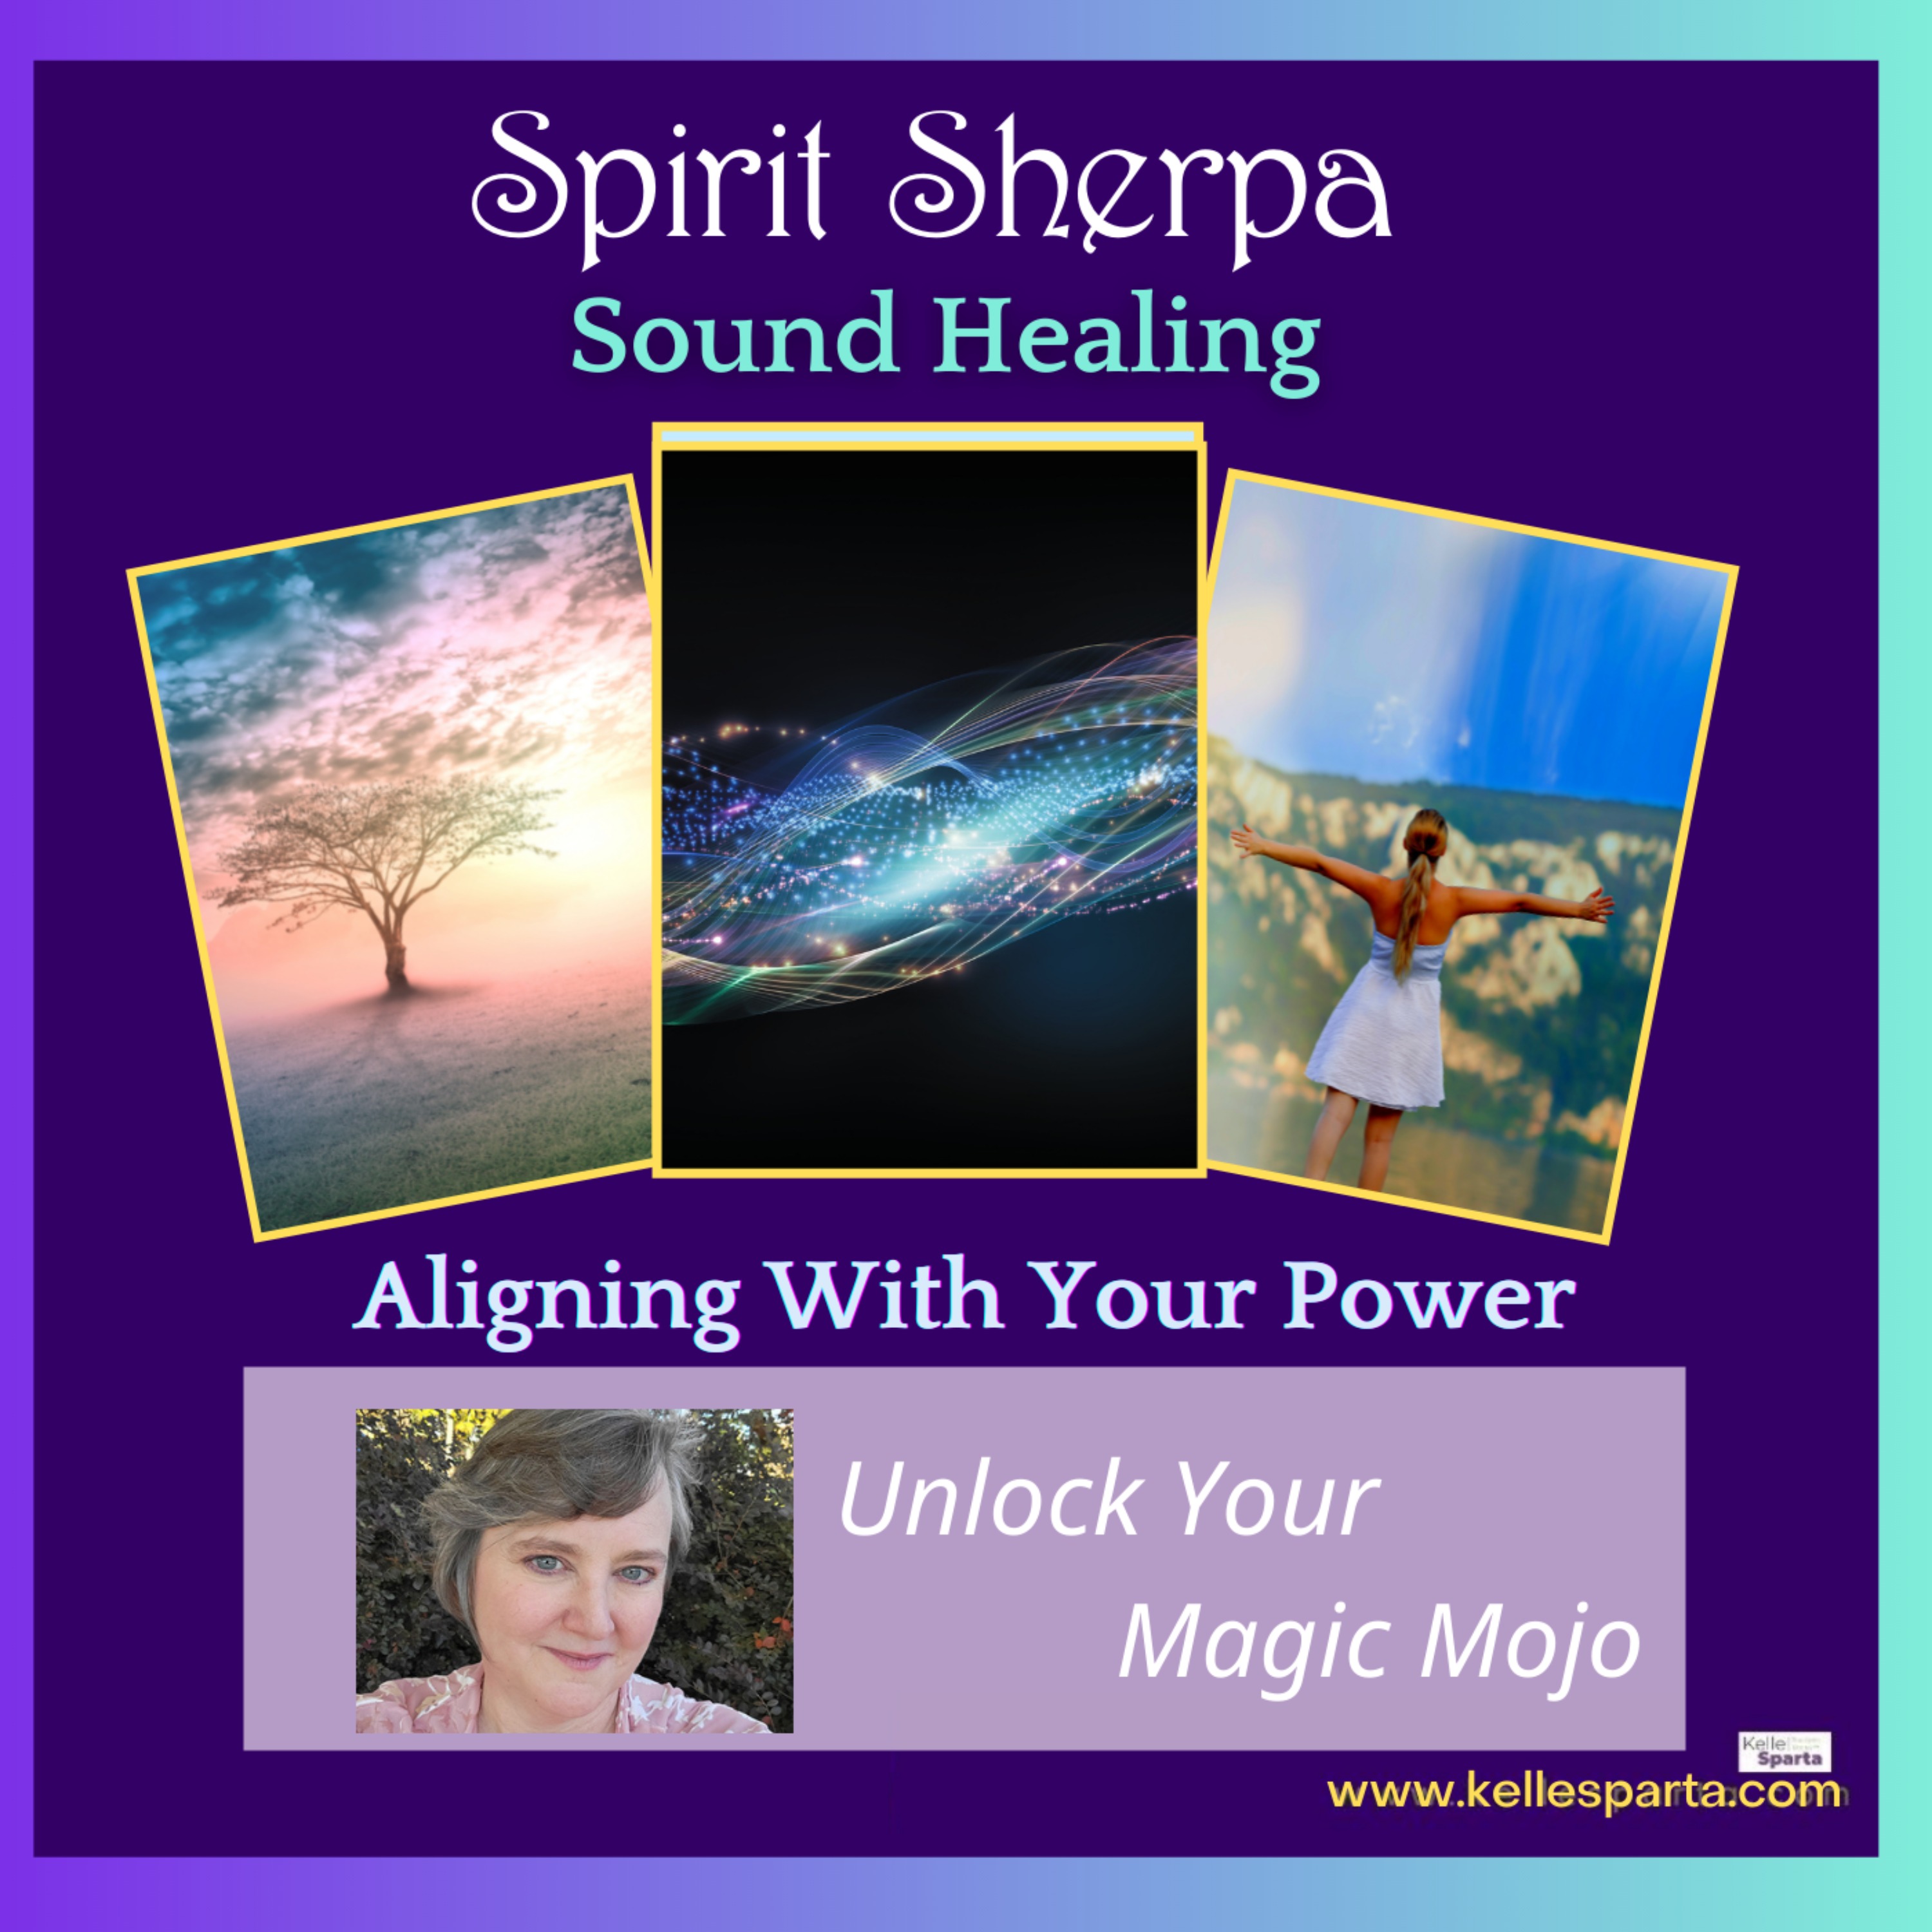 Sound Healing - Aligning With Your Power